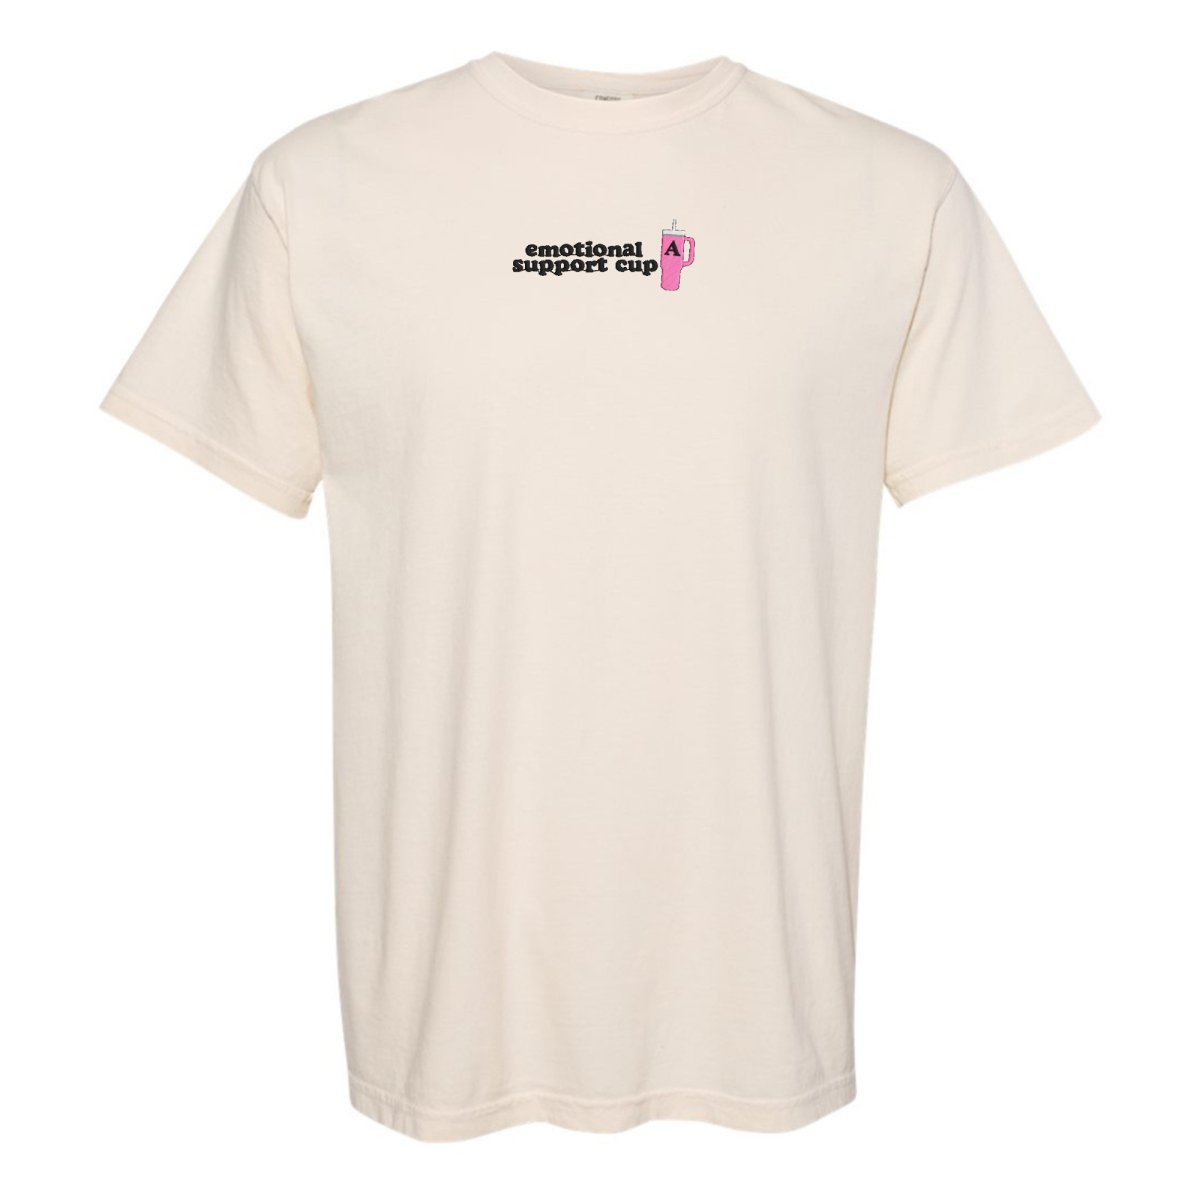 Initial 'Emotional Support Cup' T-Shirt - United Monograms